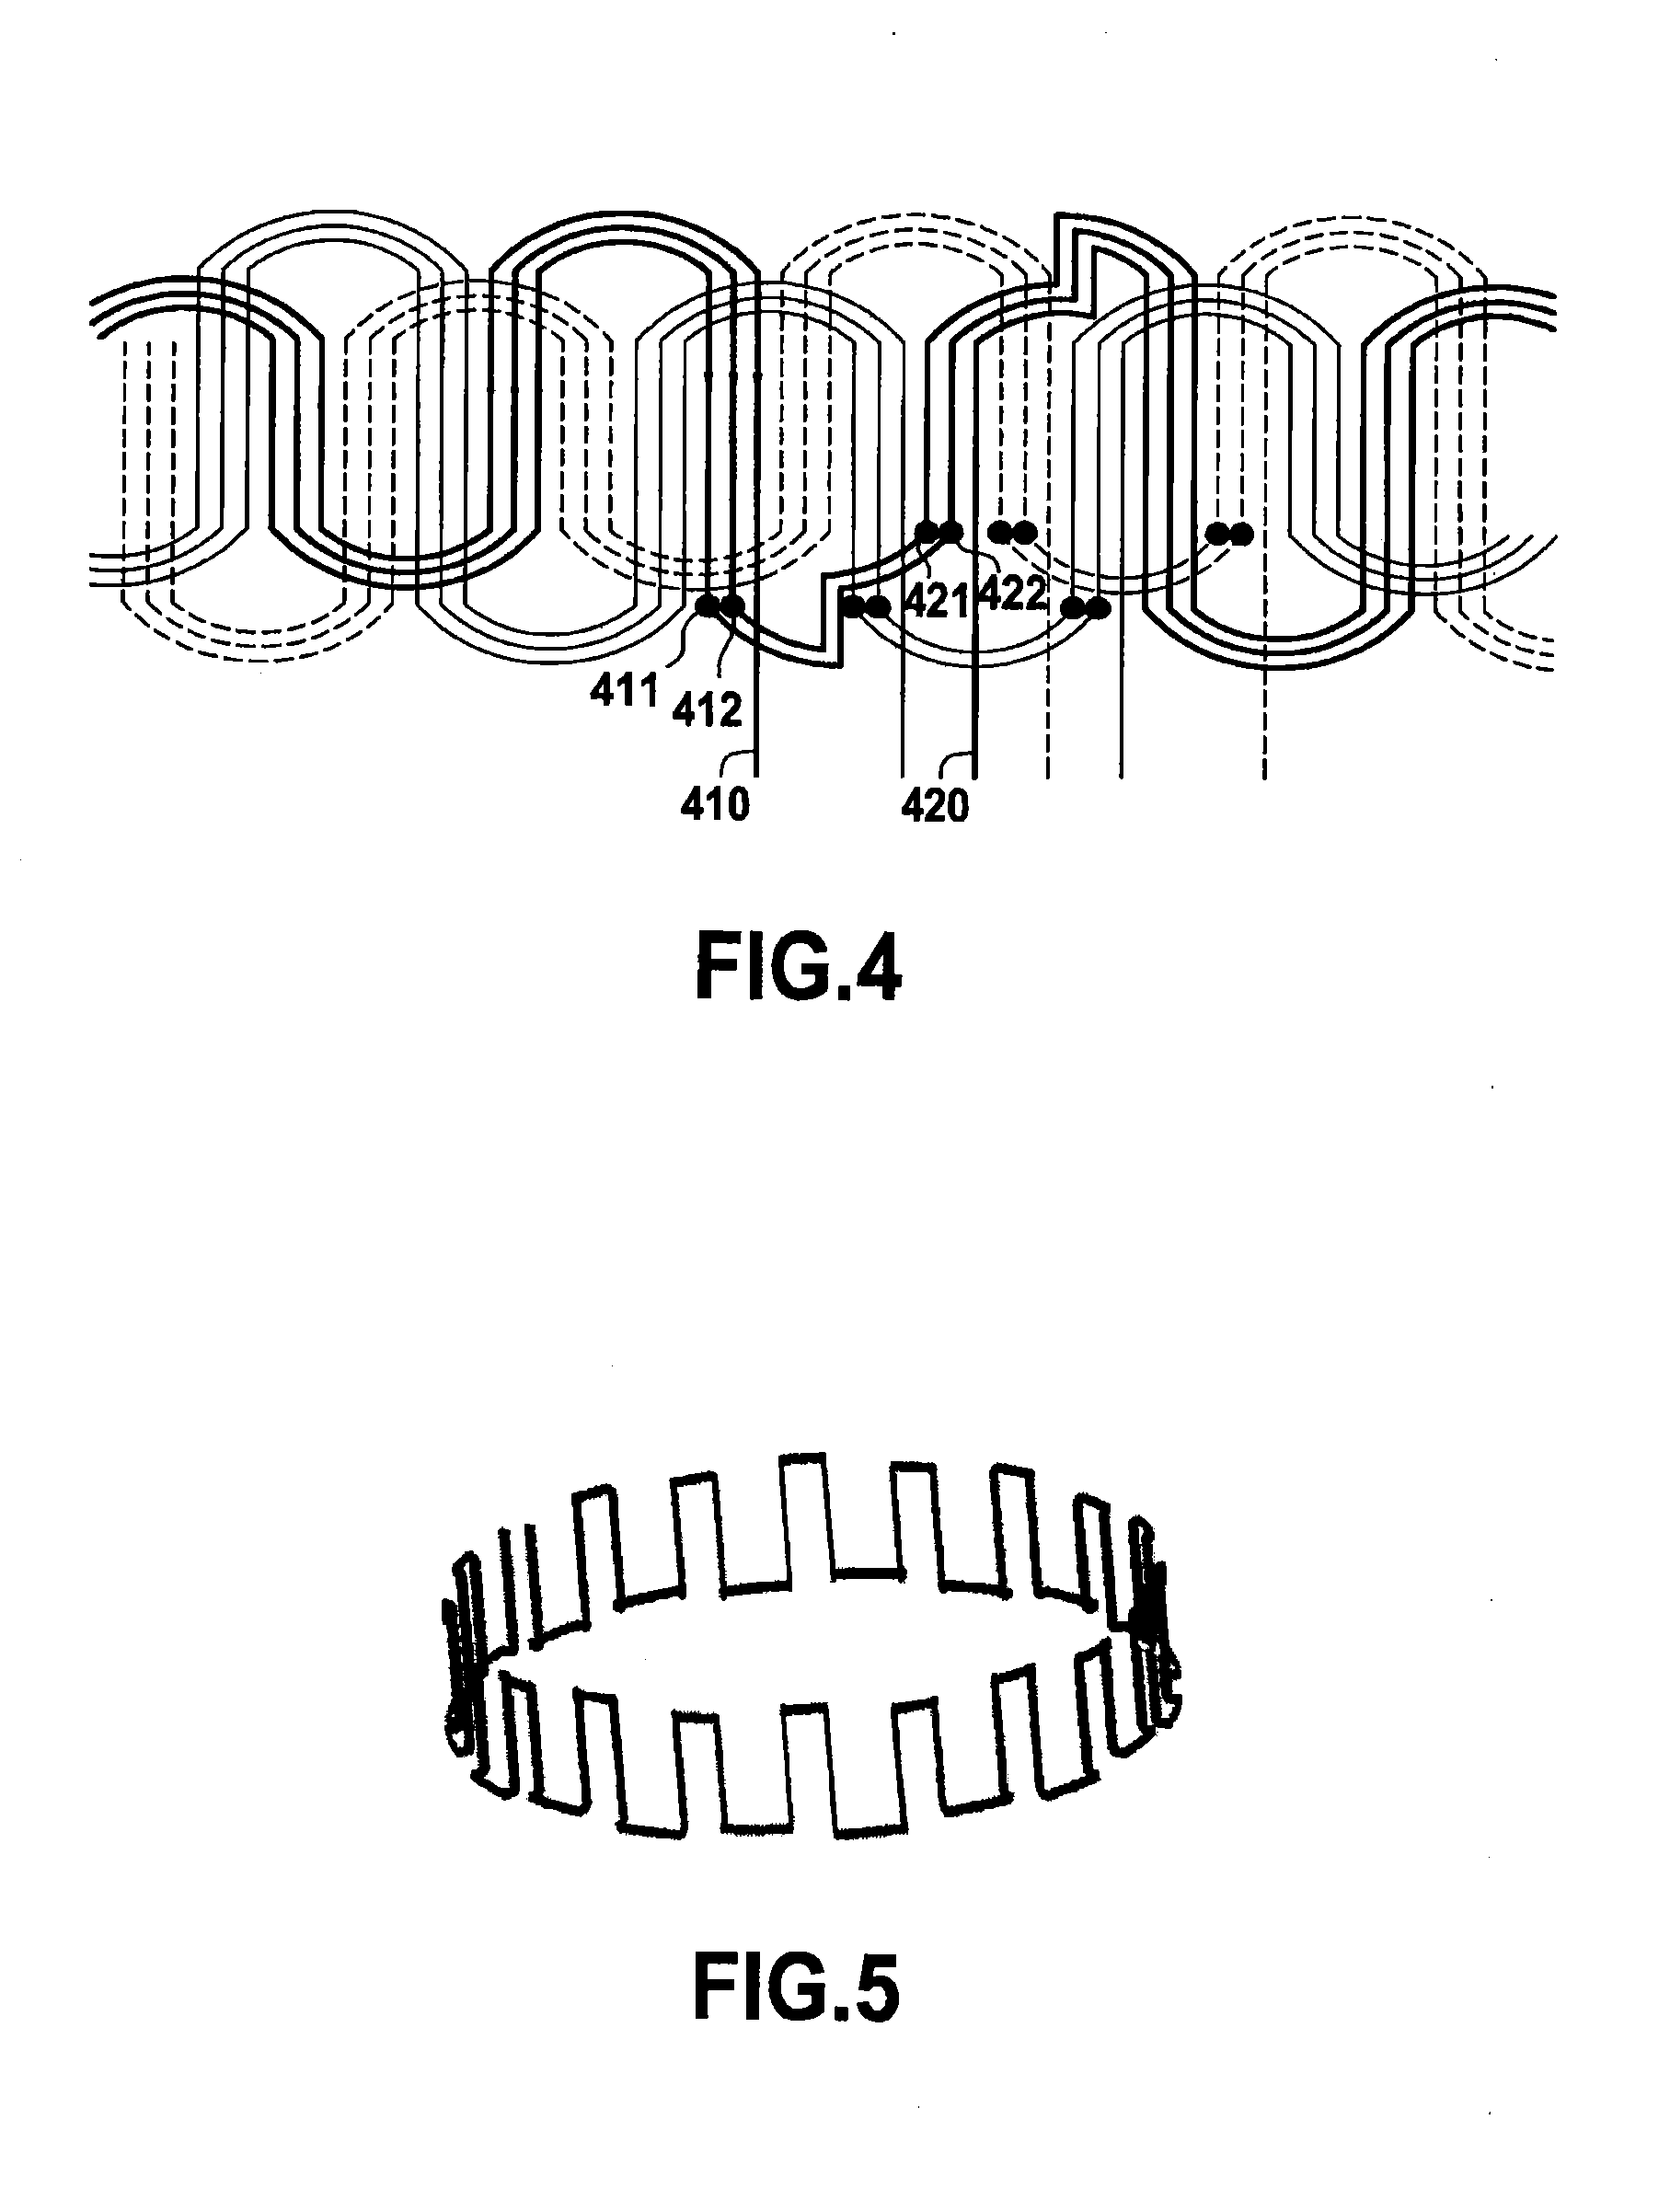 Electrical power supply system comprising an asynchronous machine, and an engine fitted with such an electrical power supply system